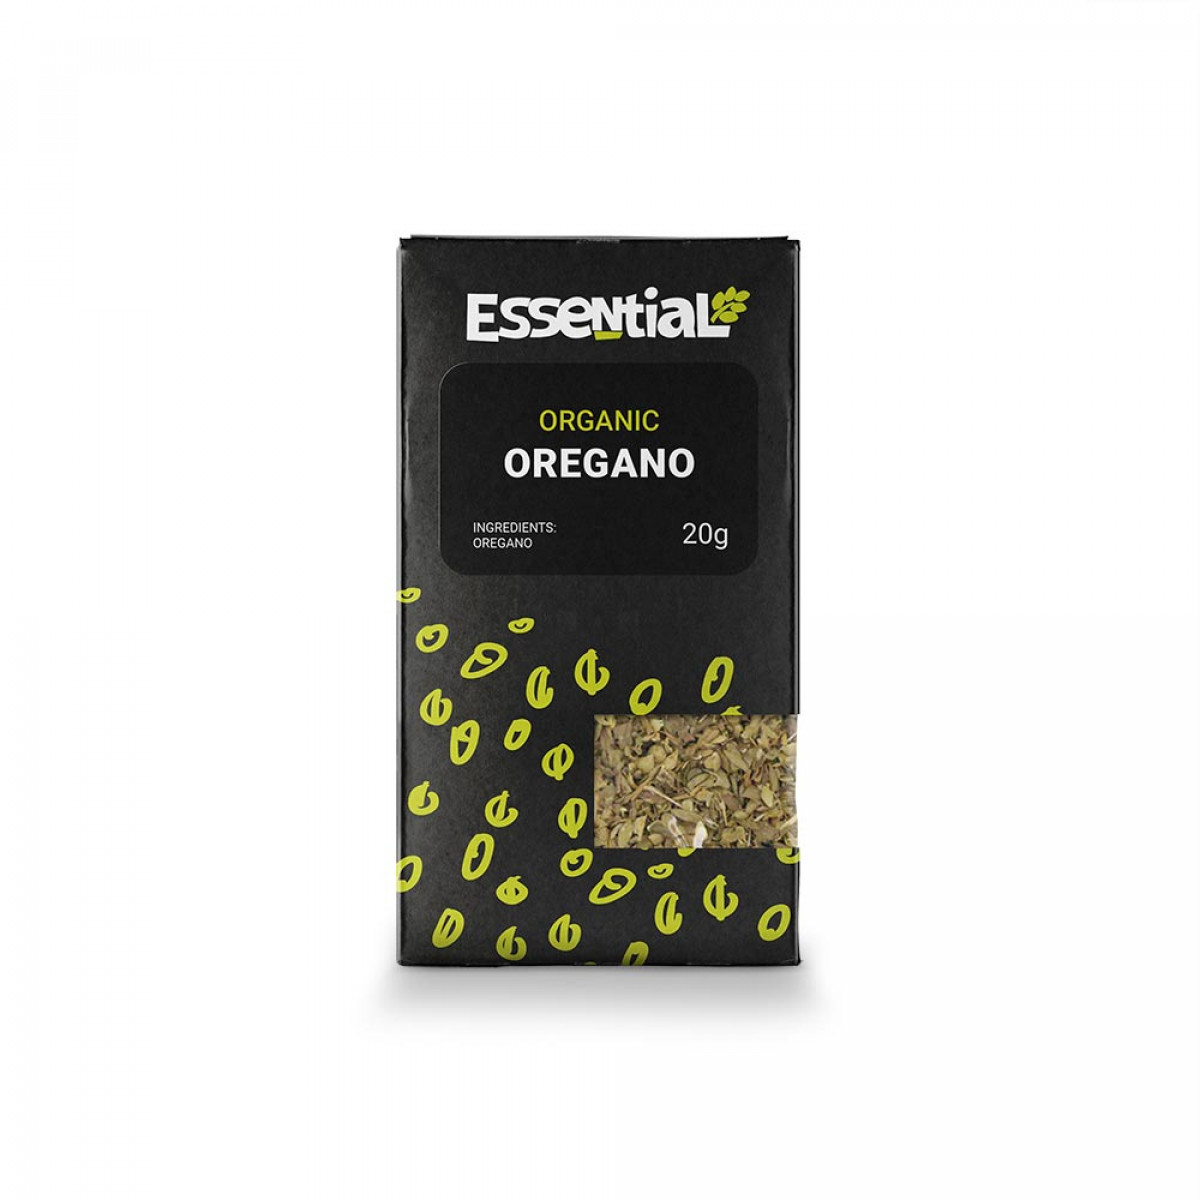 Product picture for Oregano